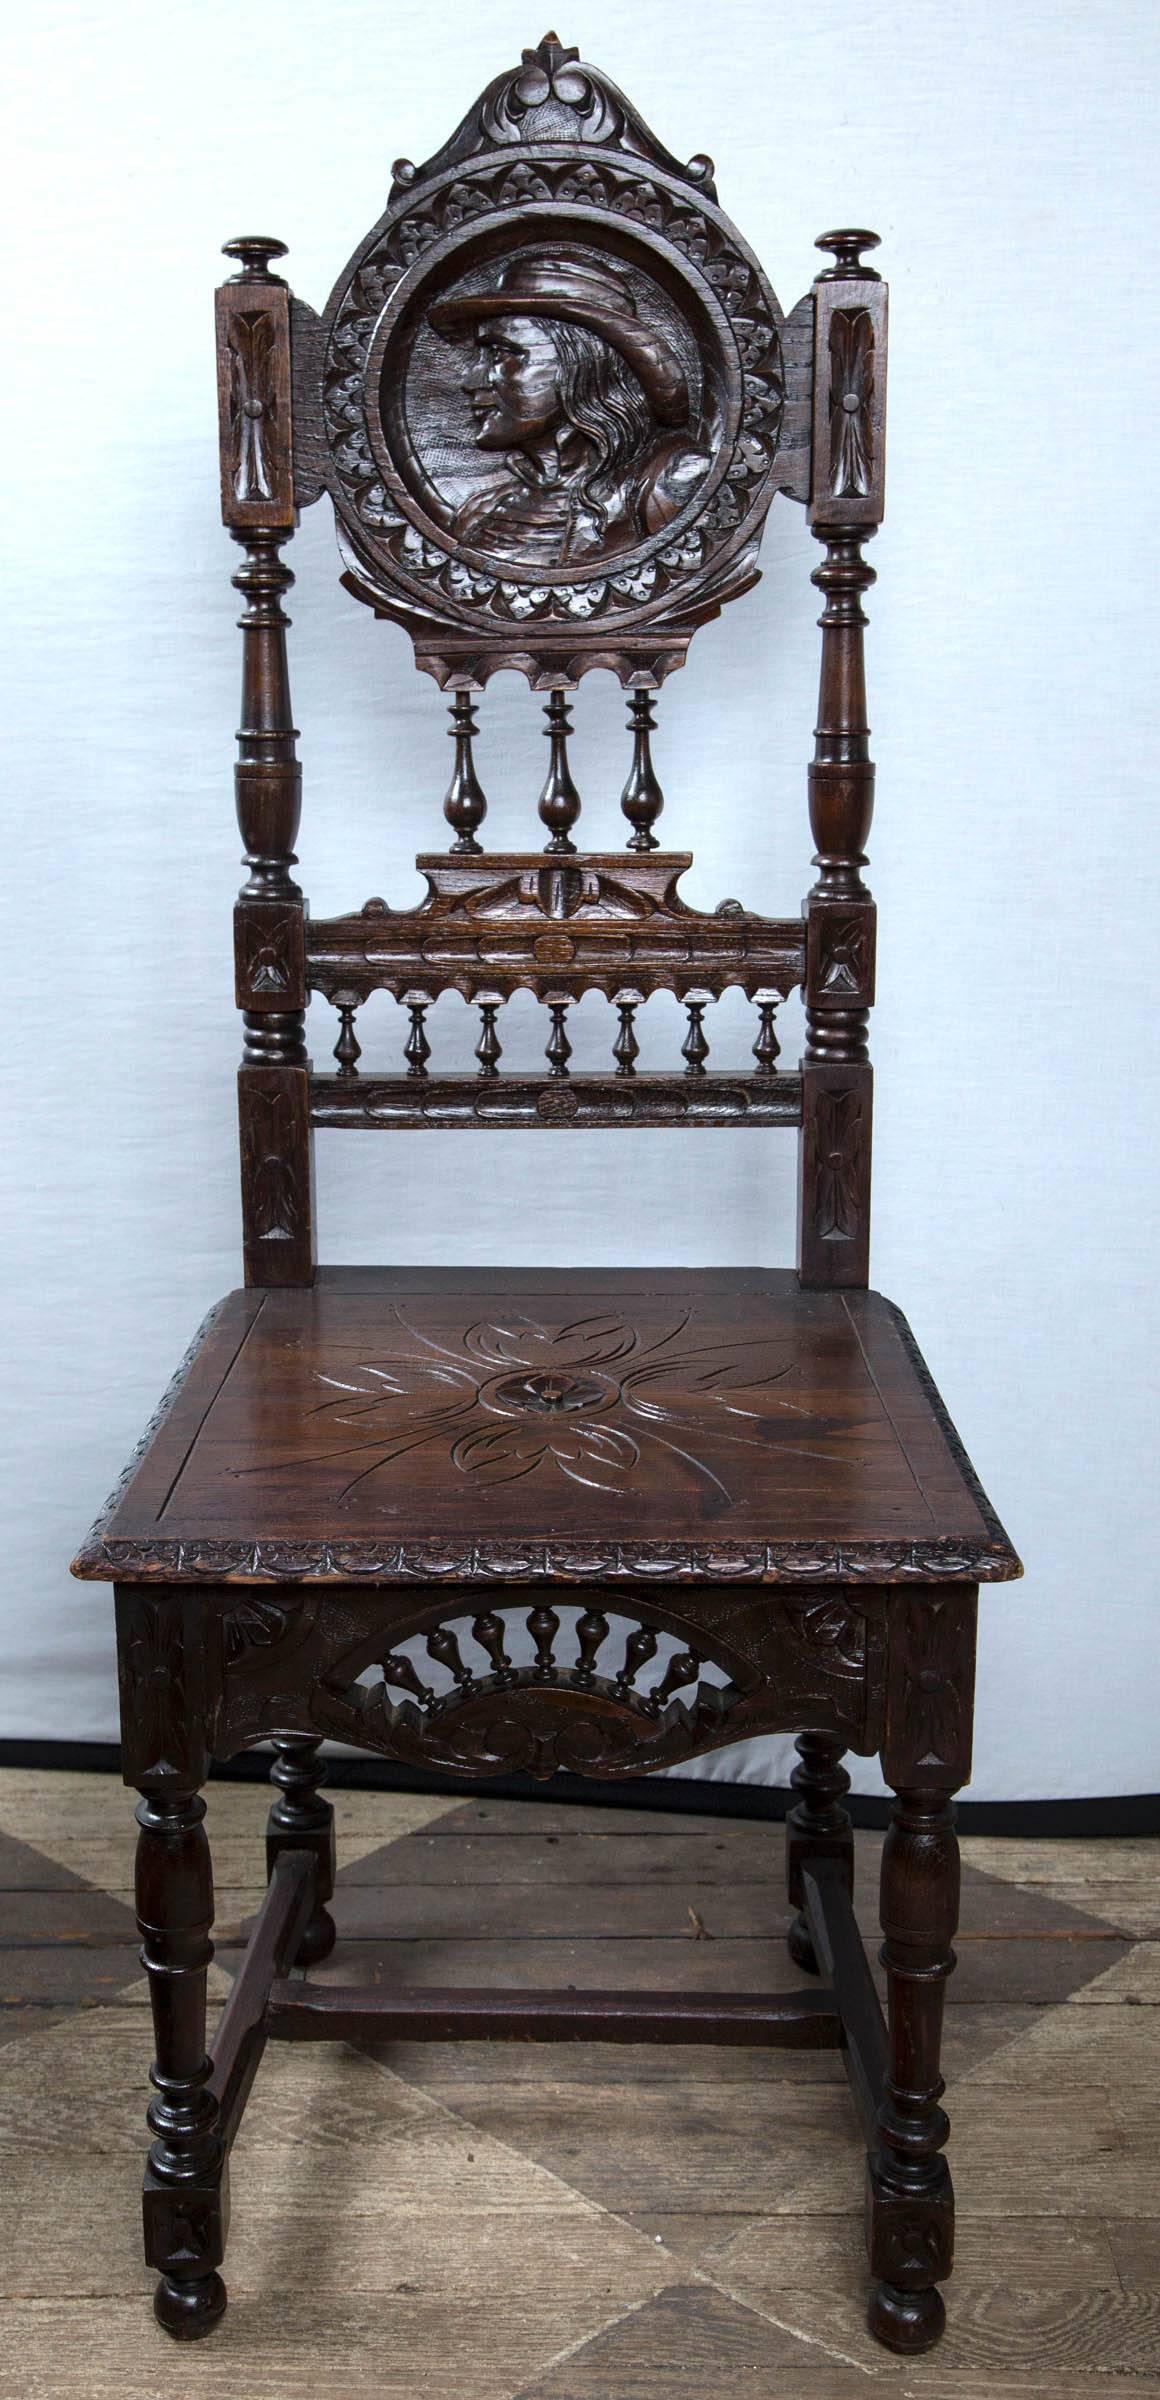 Each with a carved profile head on the back. One of a woman and one of a man. Carved floral on seat. Spindles on back, and front apron.